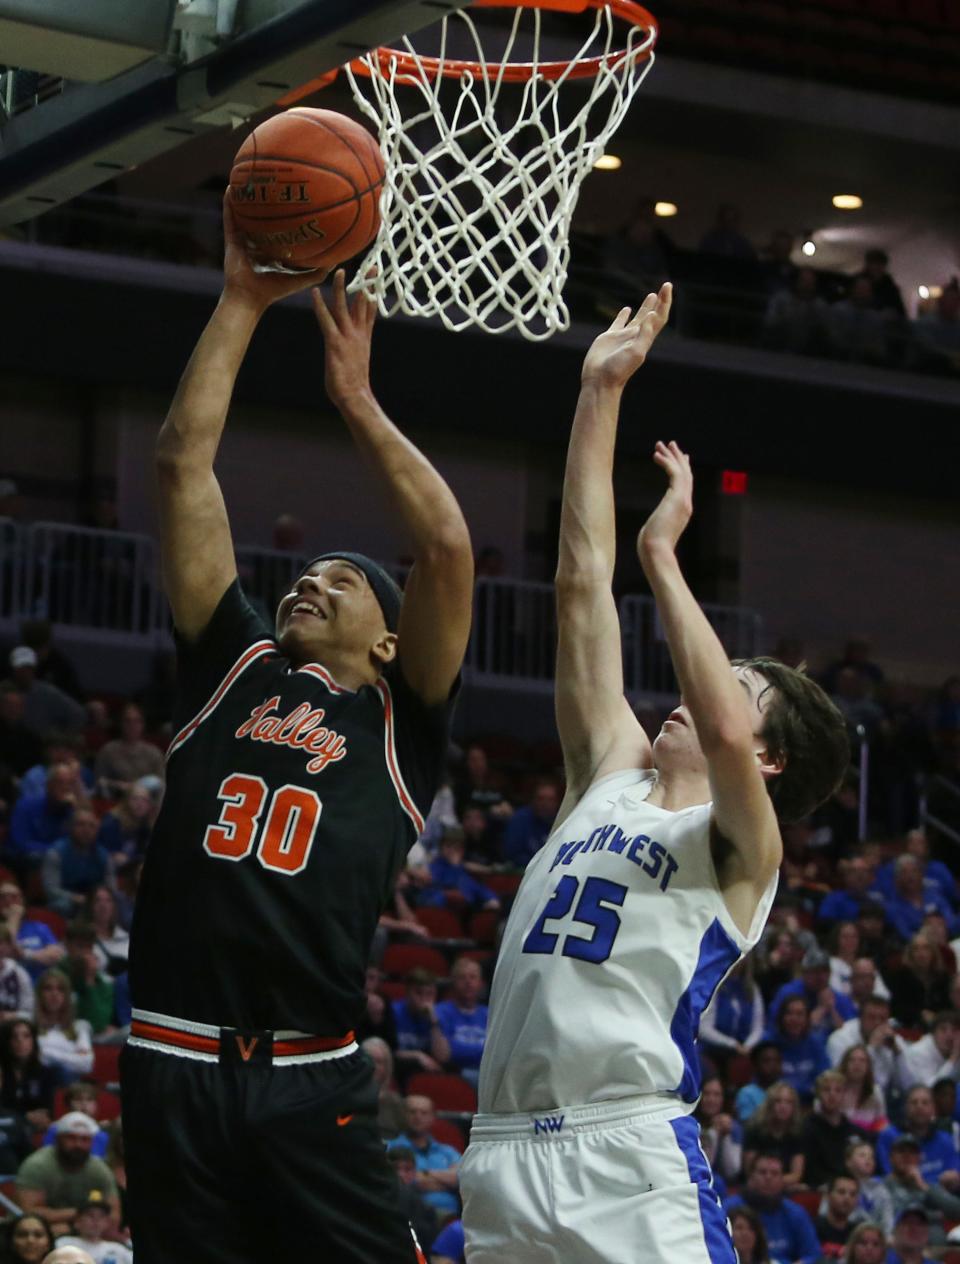 Valley guard Curtis Stinson jr. helped lead the Tigers to a state title last season.